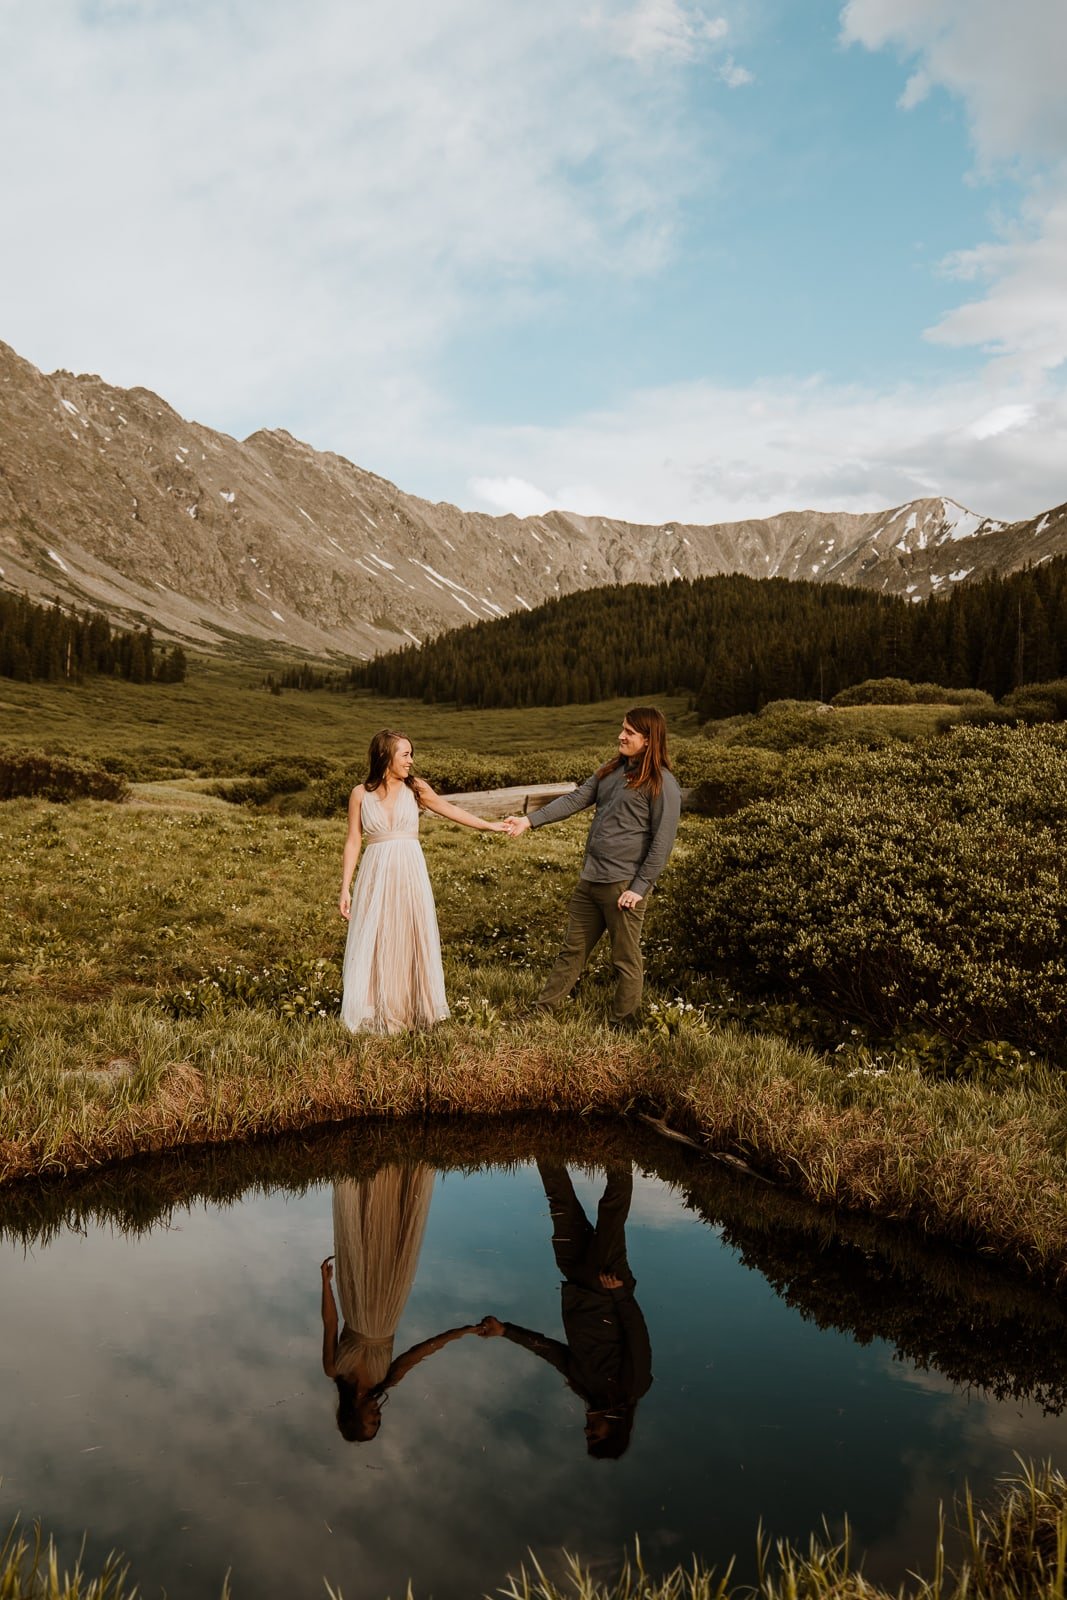 Bride and groom hold hands and walk in front of a calm and reflective lake for their adventurous mountain elopement